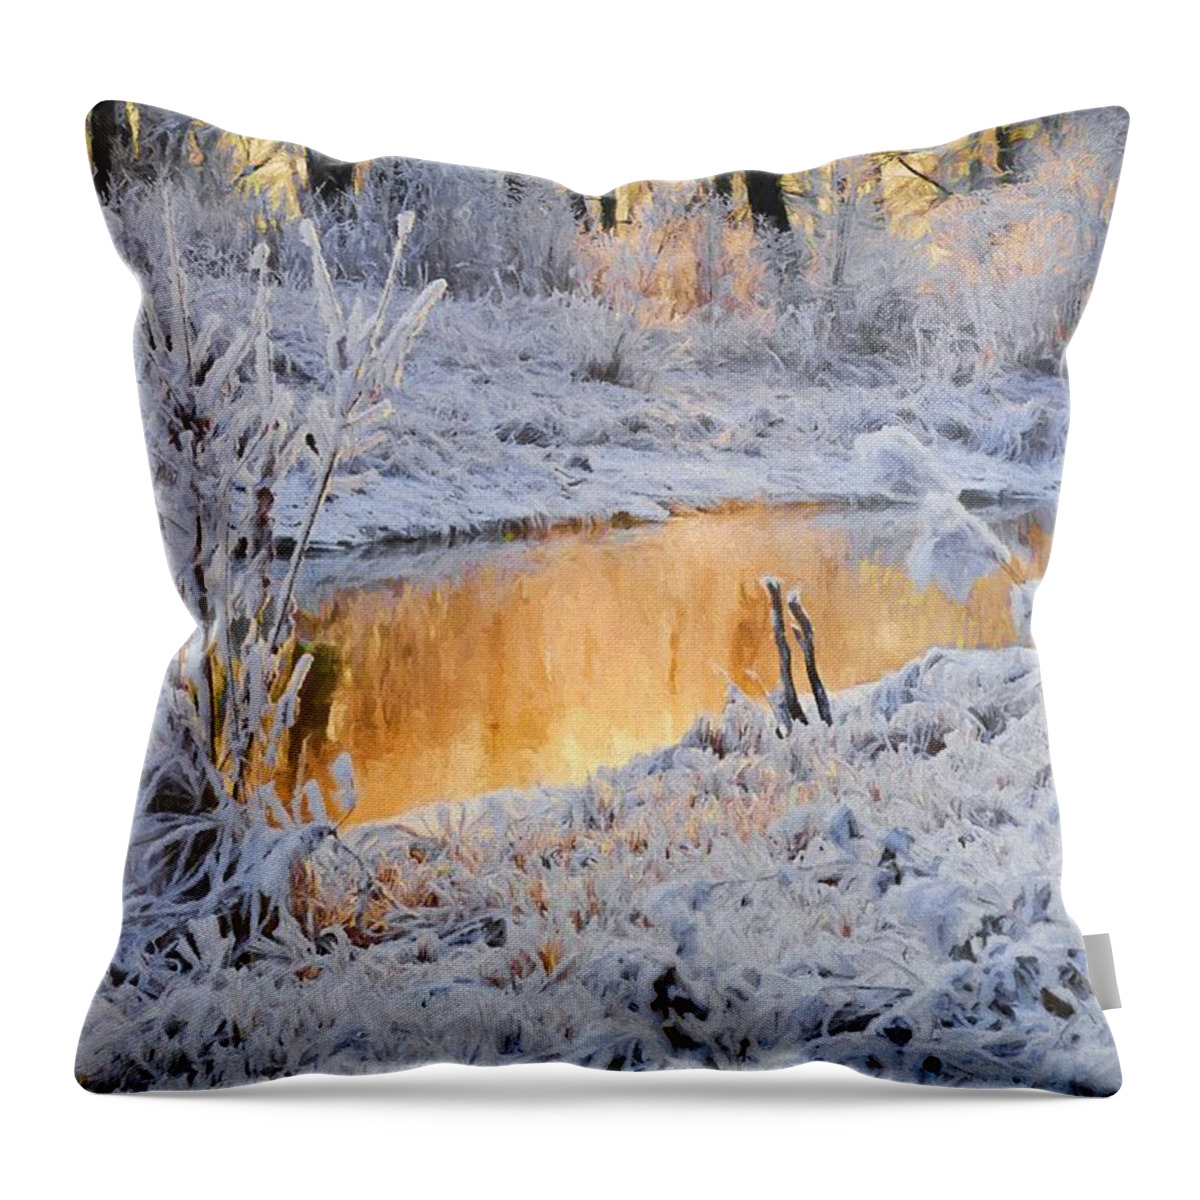 Landscape Throw Pillow featuring the digital art Snowy Sunset by Charmaine Zoe